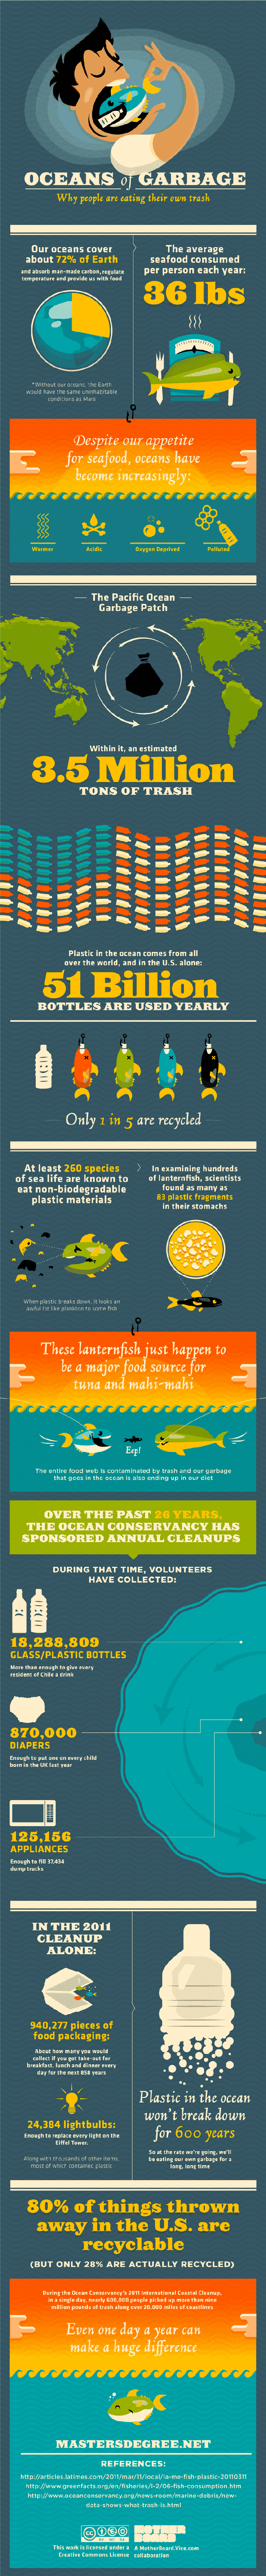 Oceans Of Garbage - 10 Shocking Infographics About Plastic Waste In The Oceans